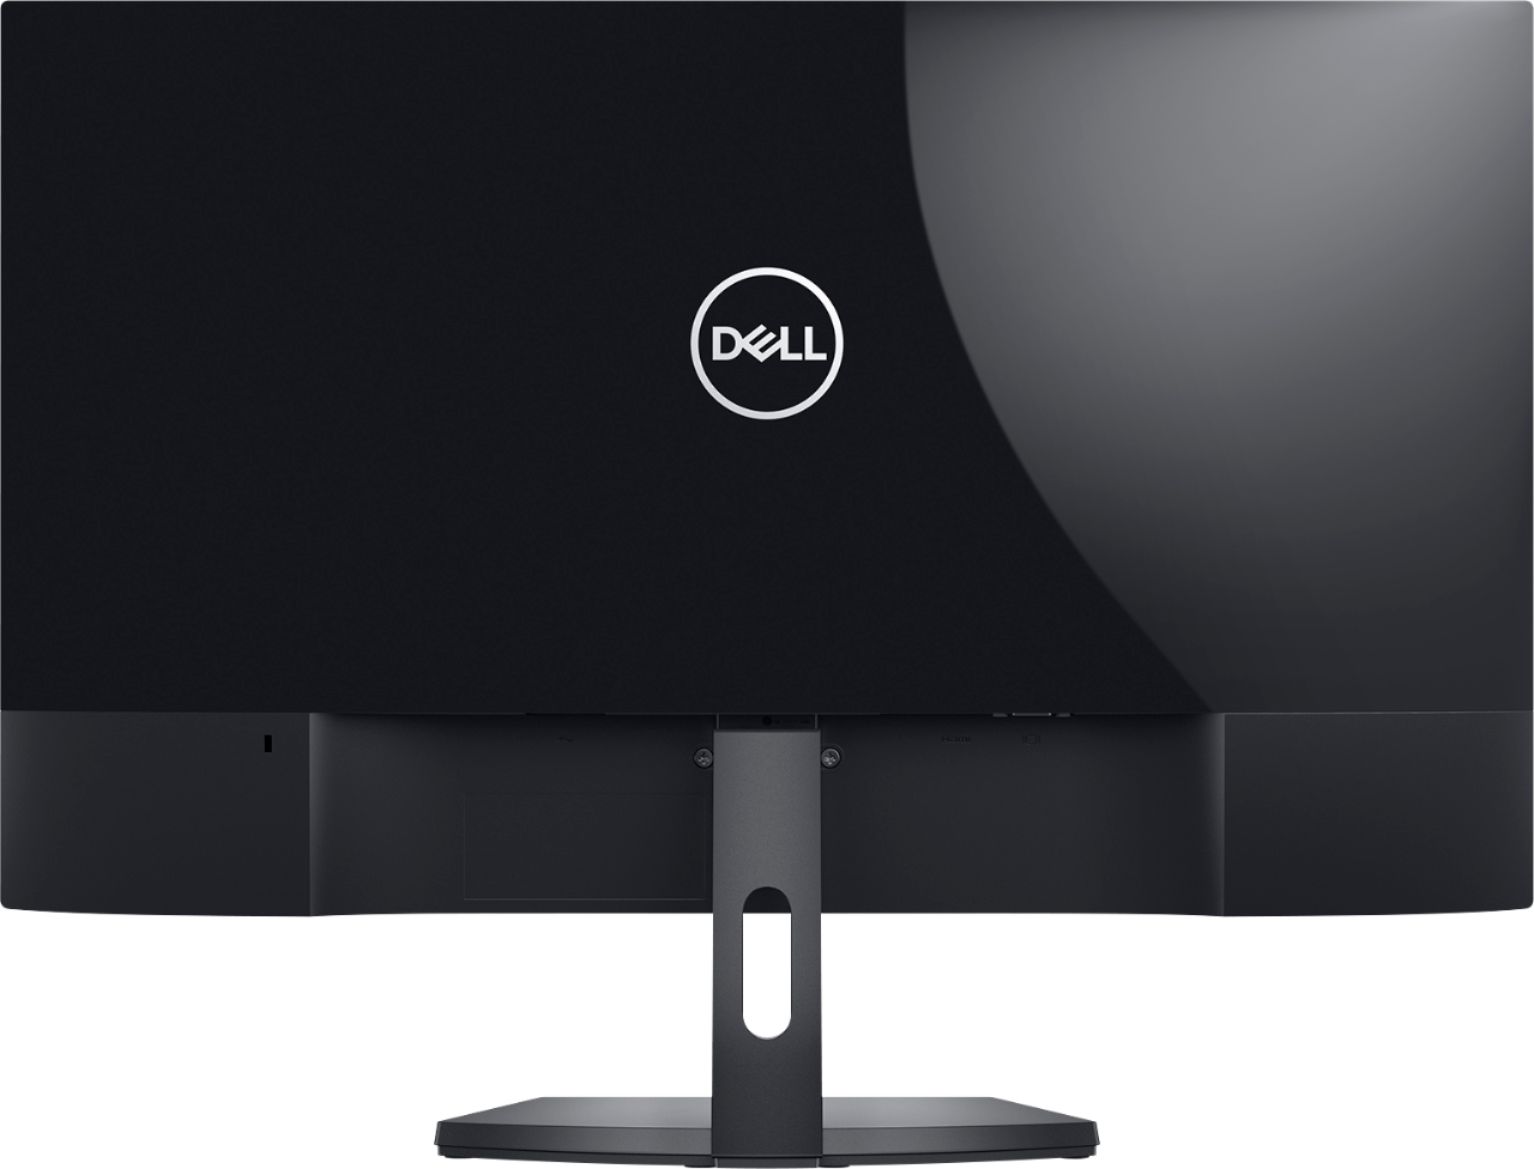 Back View: Dell - Geek Squad Certified Refurbished 27" IPS LED FHD FreeSync Monitor - Piano Black